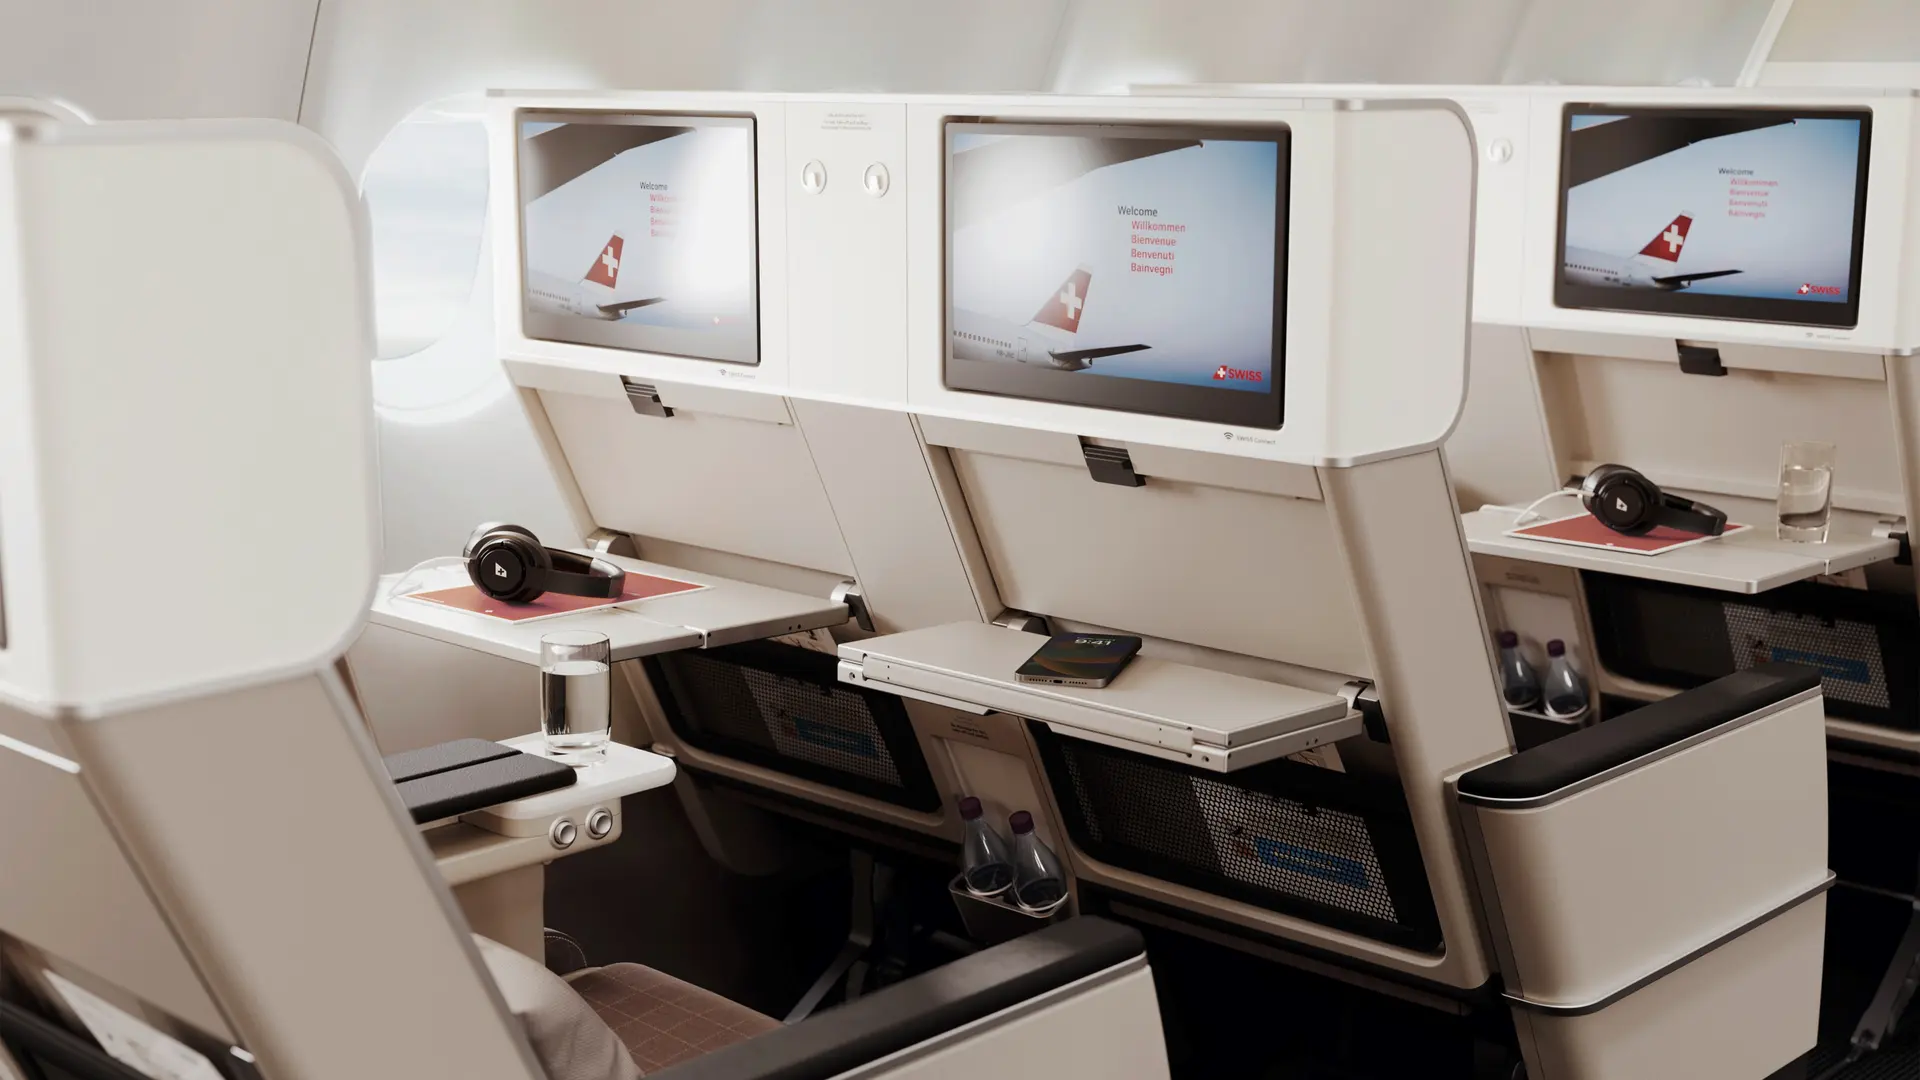 Airlines News - SWISS unveils its new Business and First Class cabins